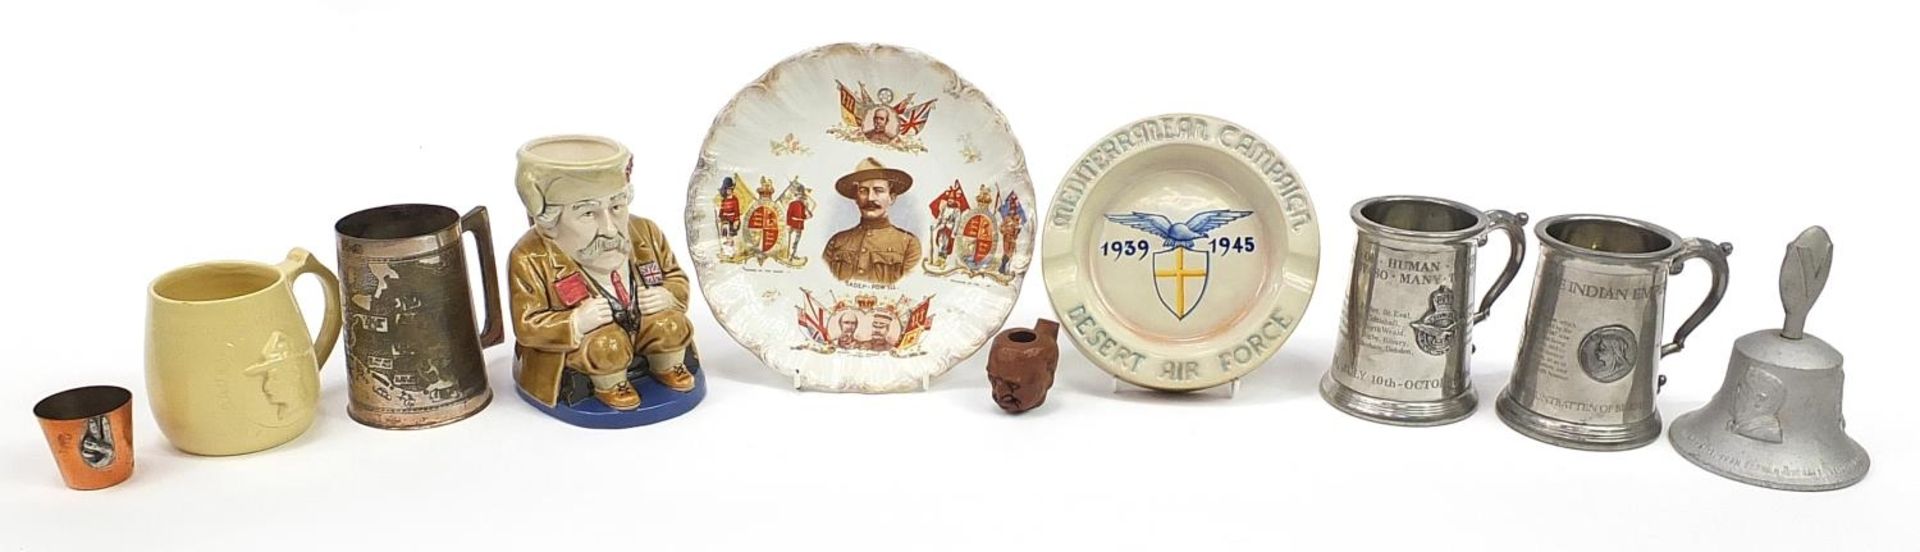 Military interest and commemorative collectables including Toby jug in the form of a gentleman,